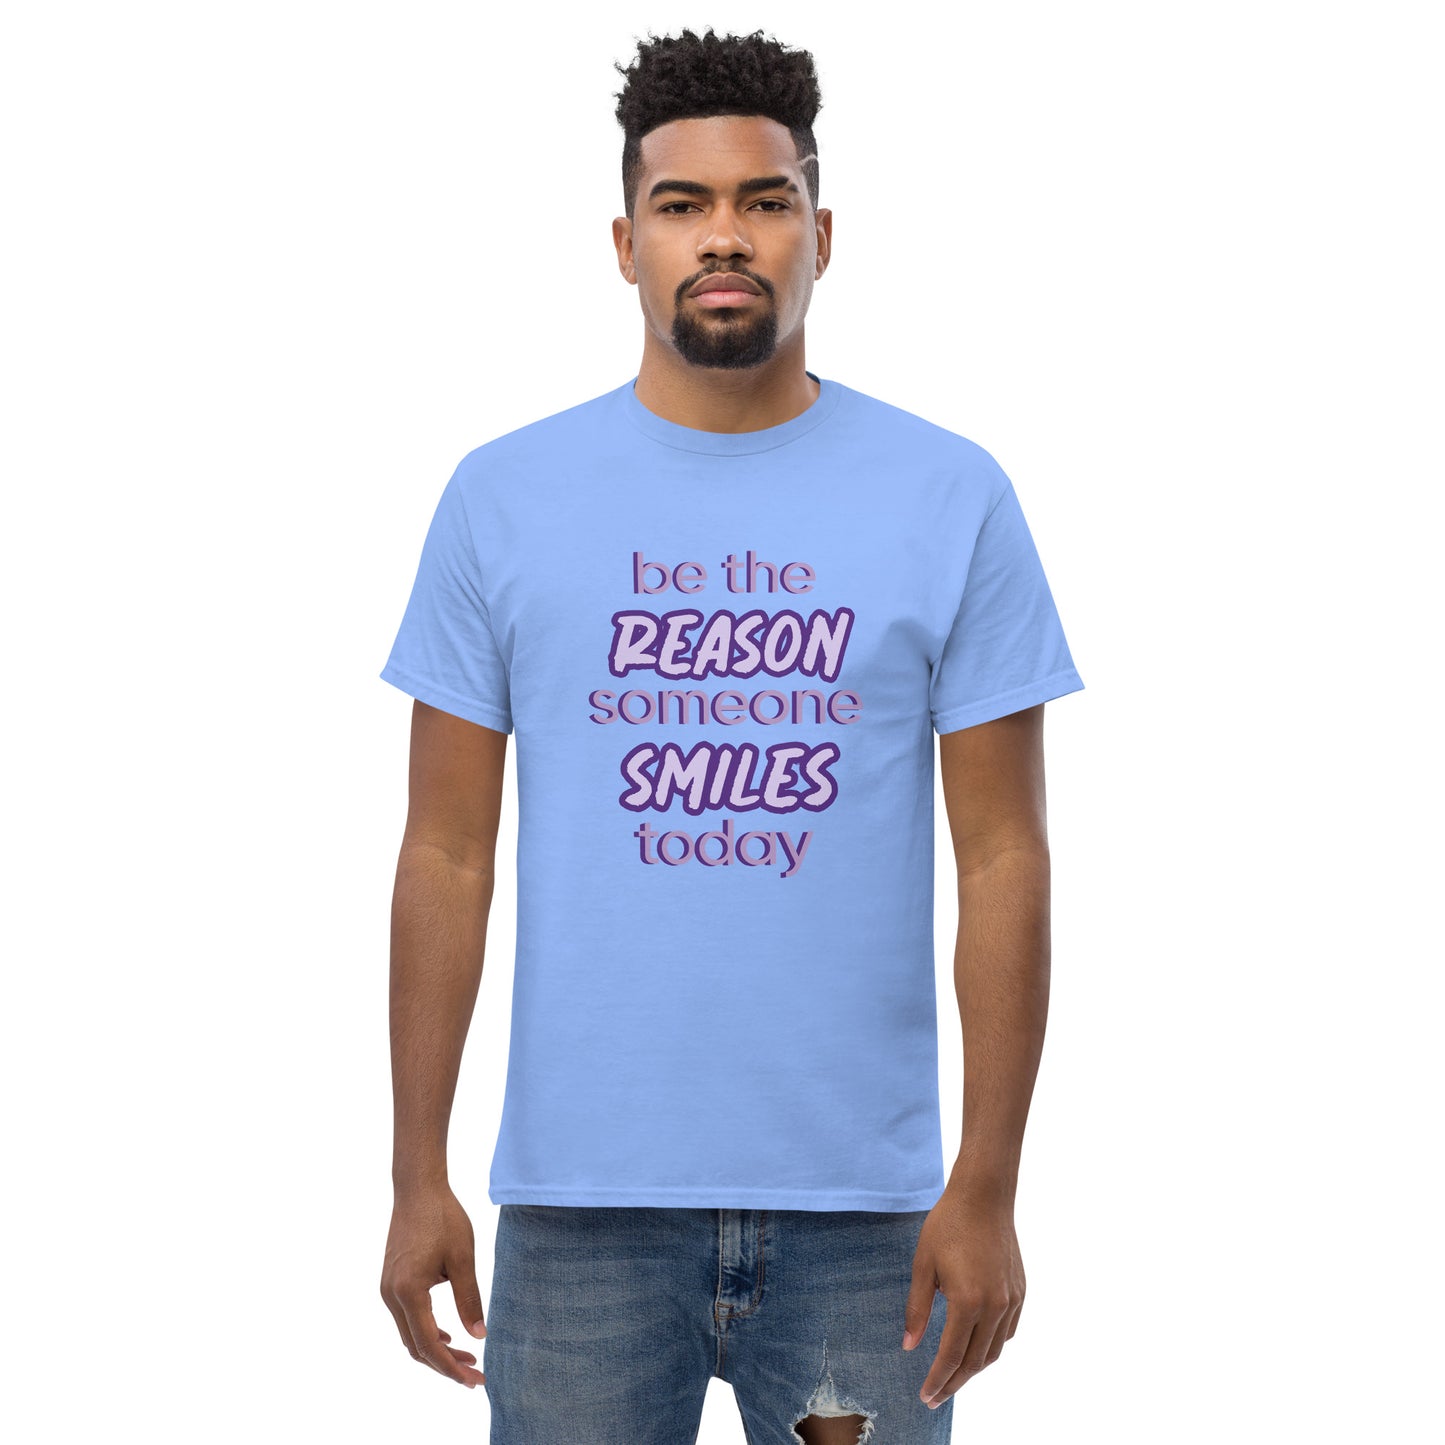 Men with carolina blue T-shirt and the quote "be the reason someone smiles today" in purple on it. 